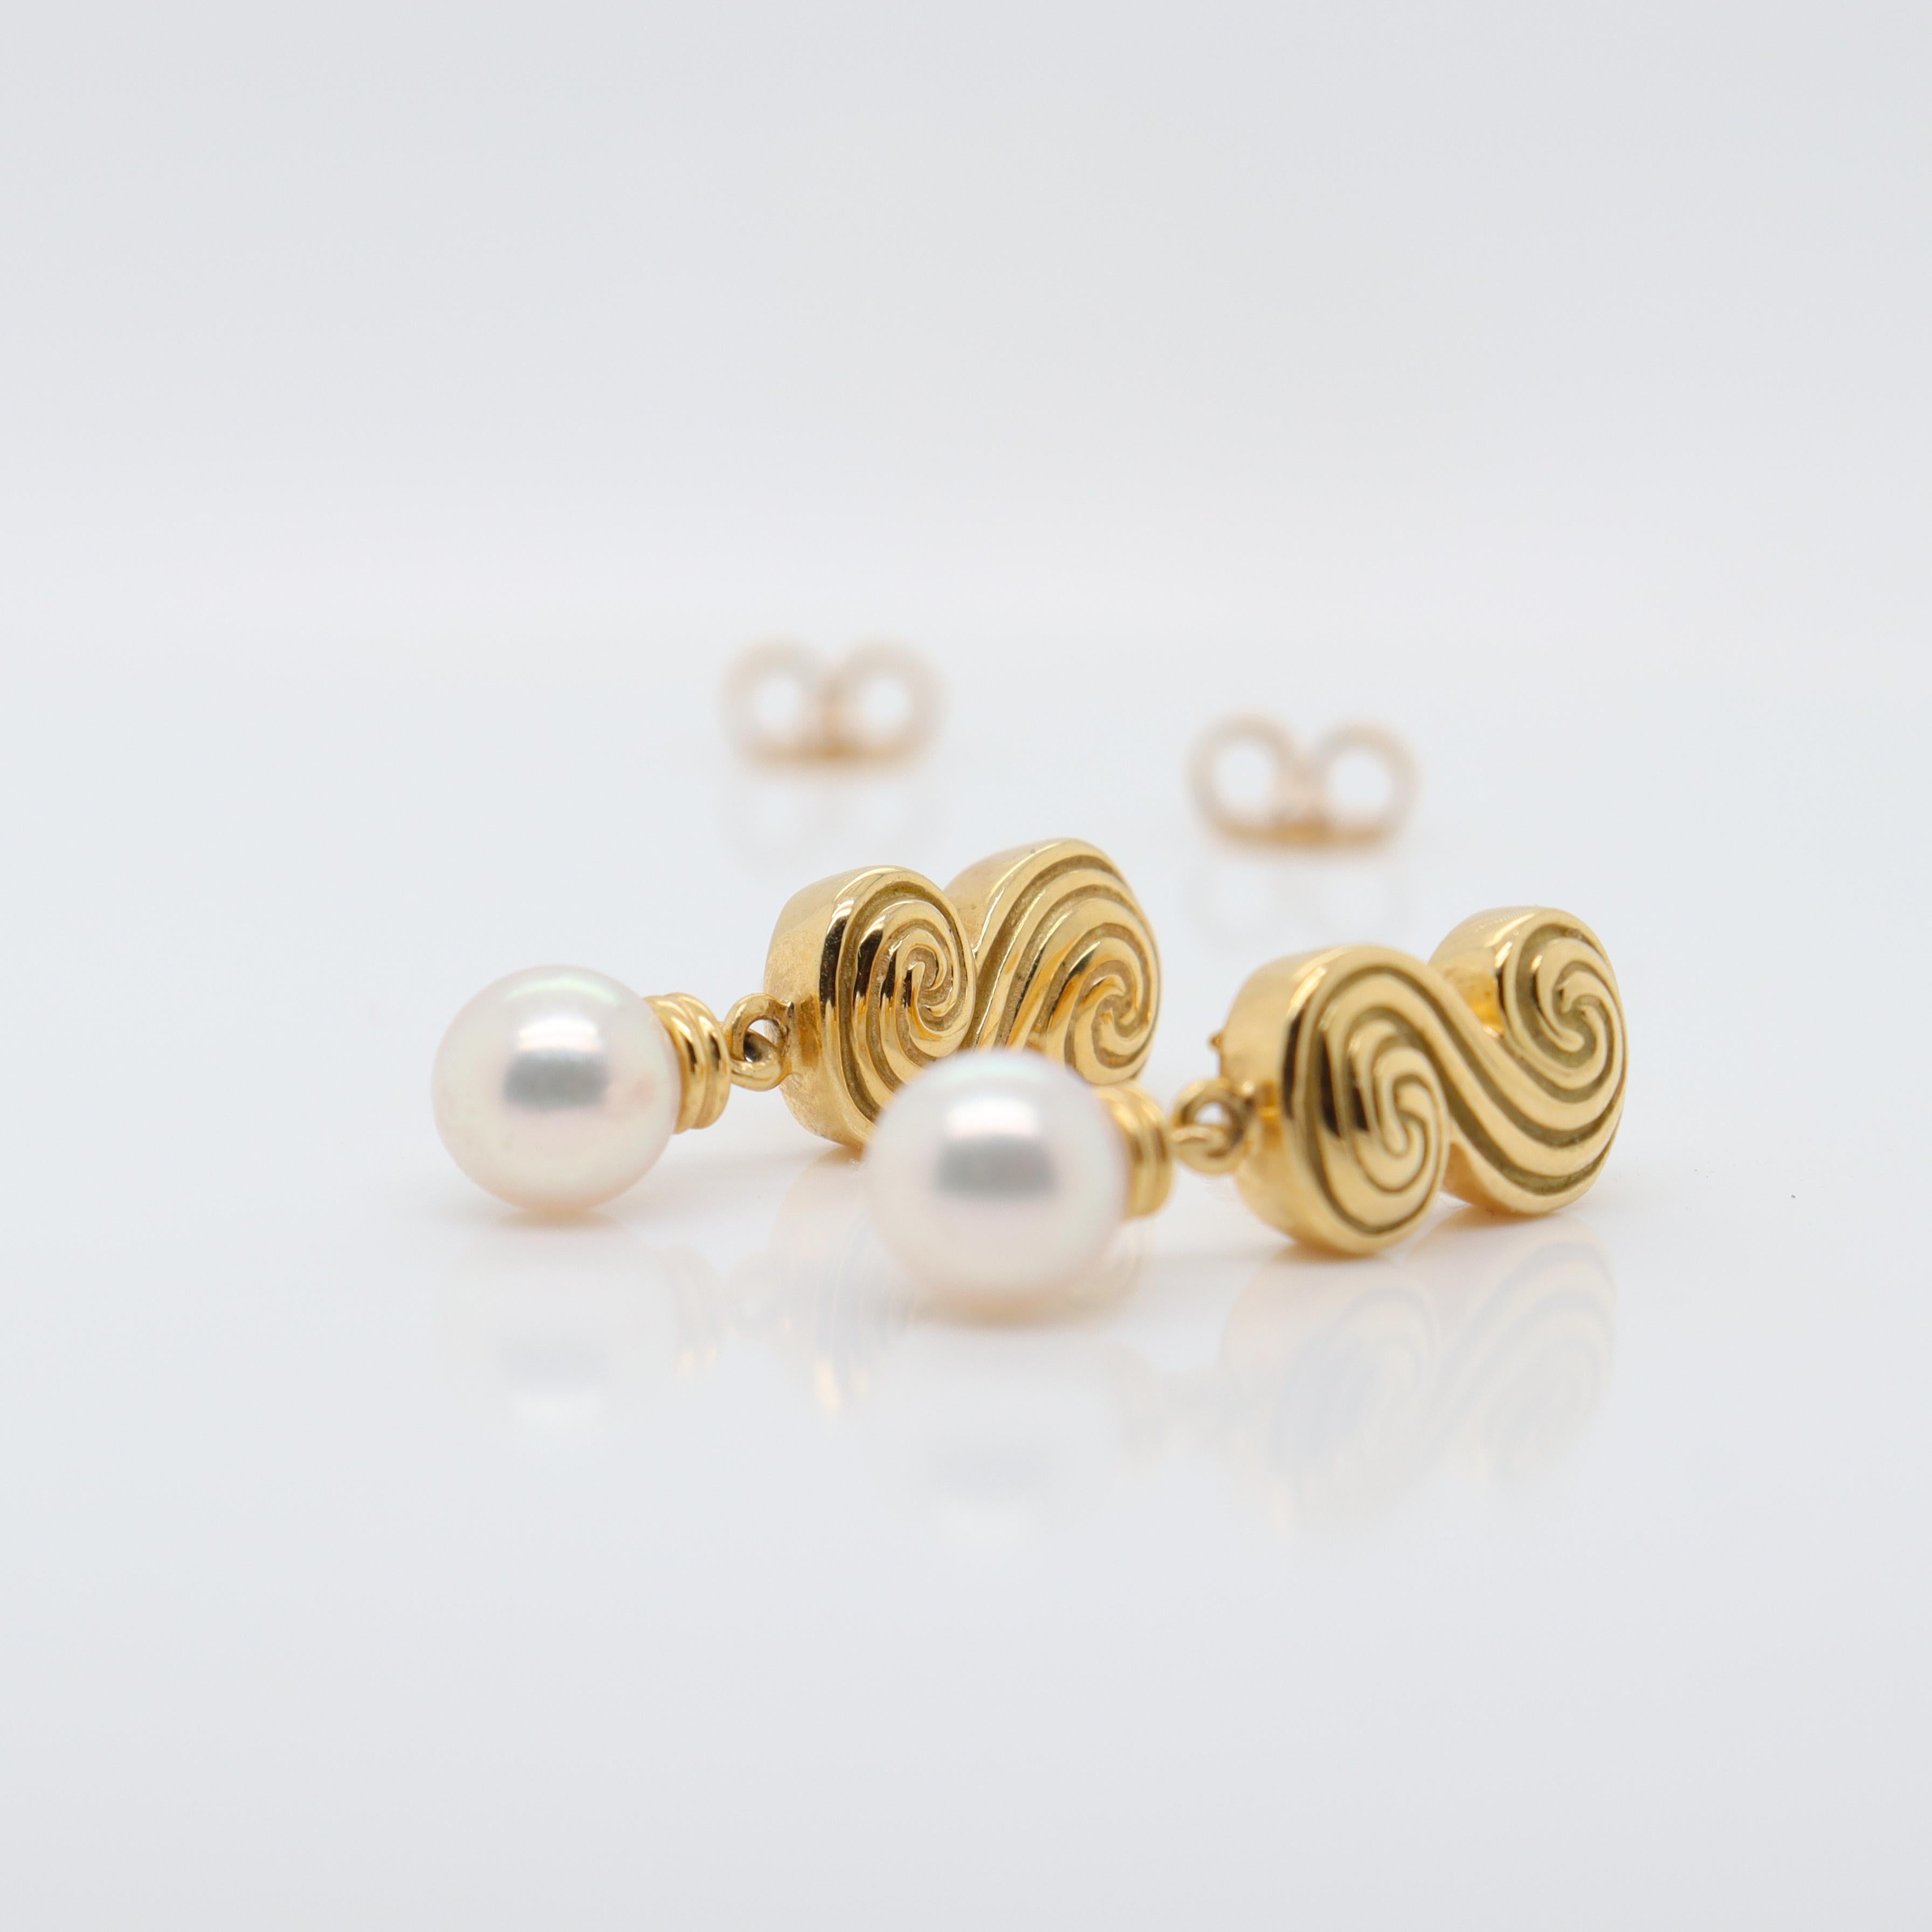 Modern Vintage Tiffany & Co 18K Gold Double Spiral or 'S' Scroll Earrings w Pearl Drops For Sale